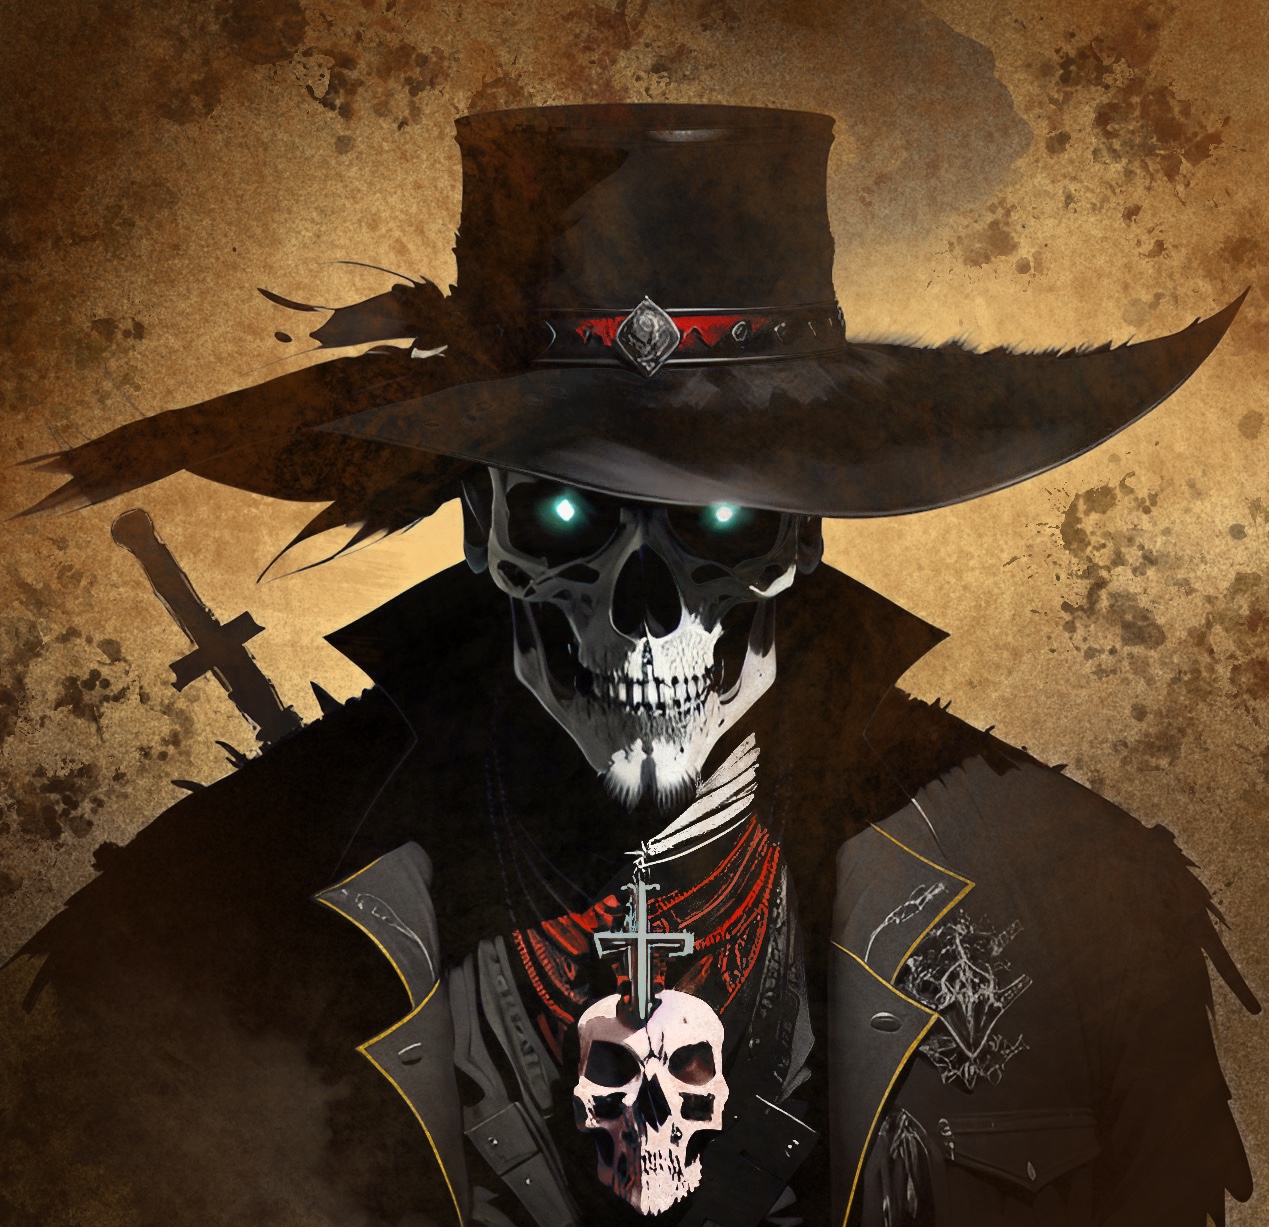 The Undead Outlaws